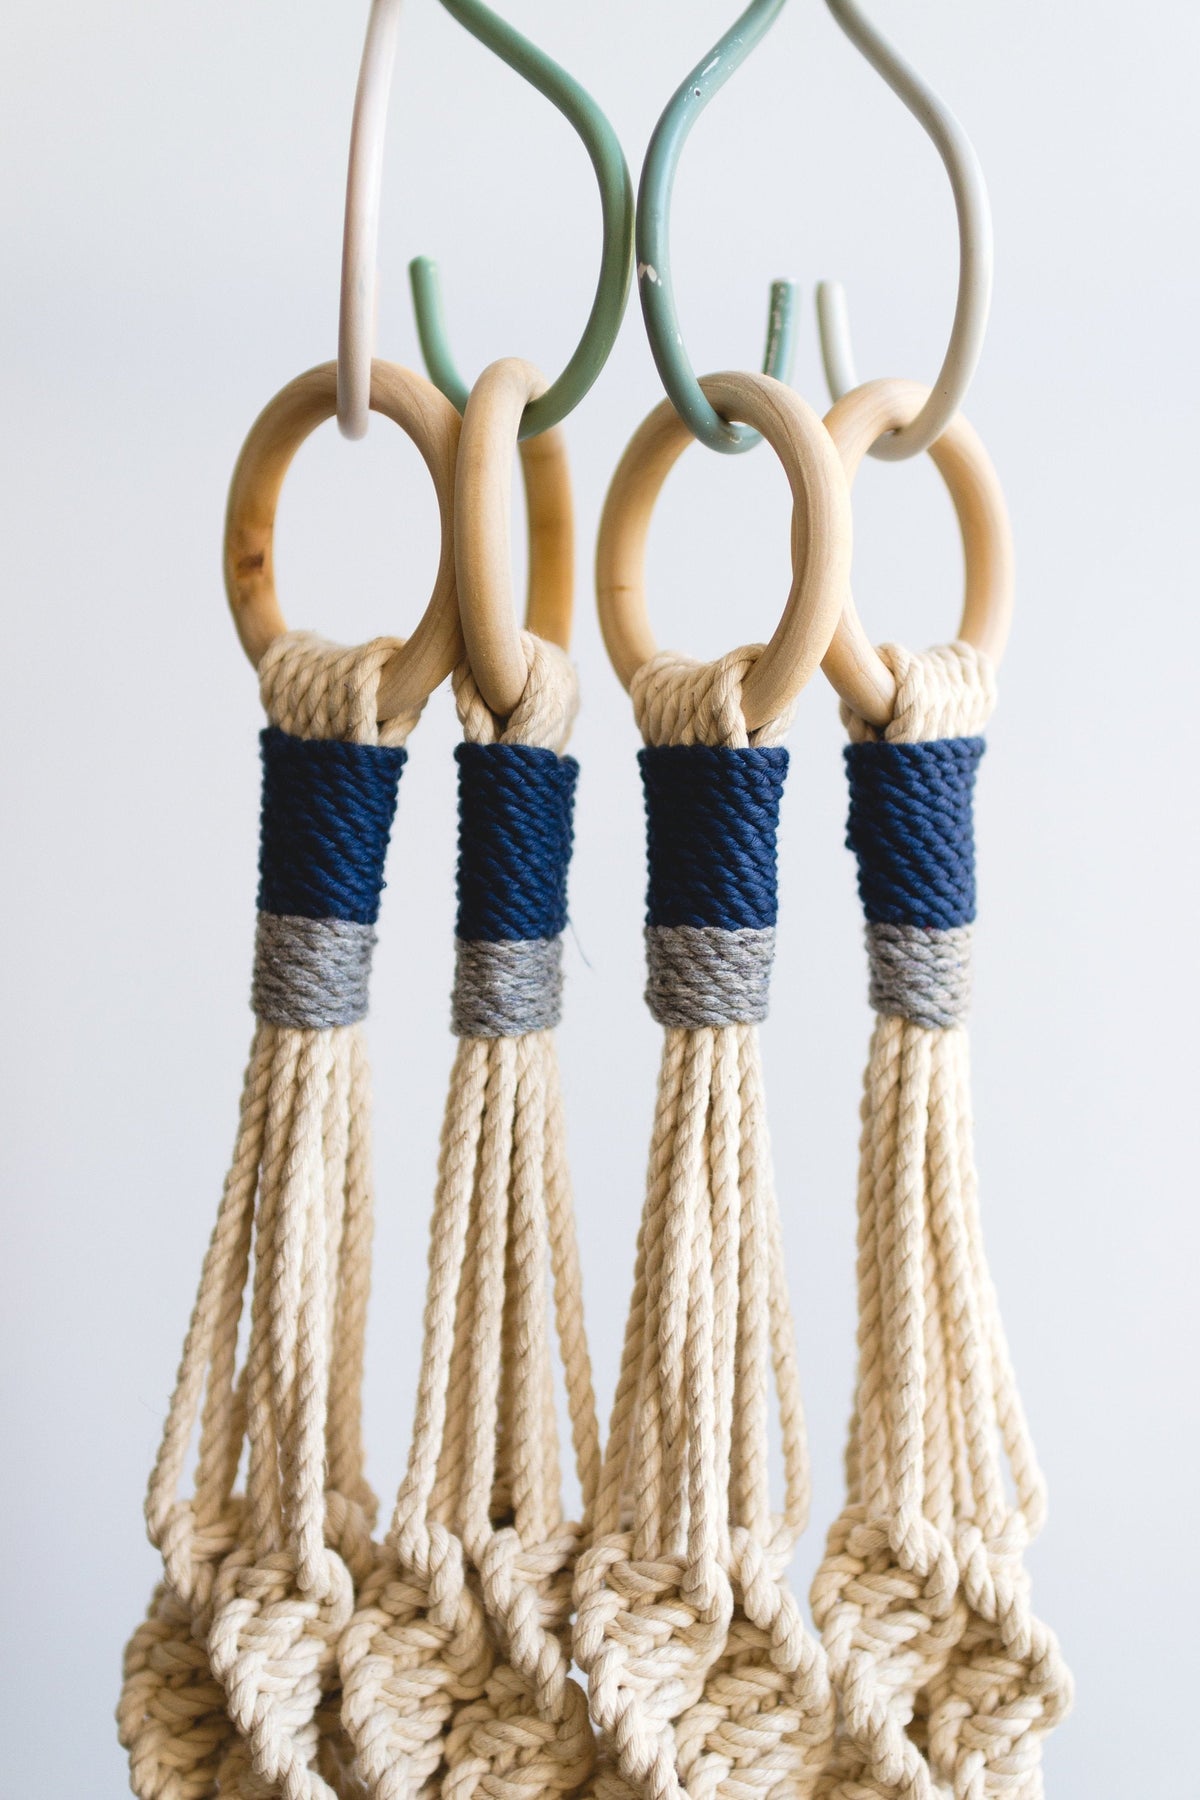 Macrame plant hanger 40&quot; in length with Blue and Gray details.